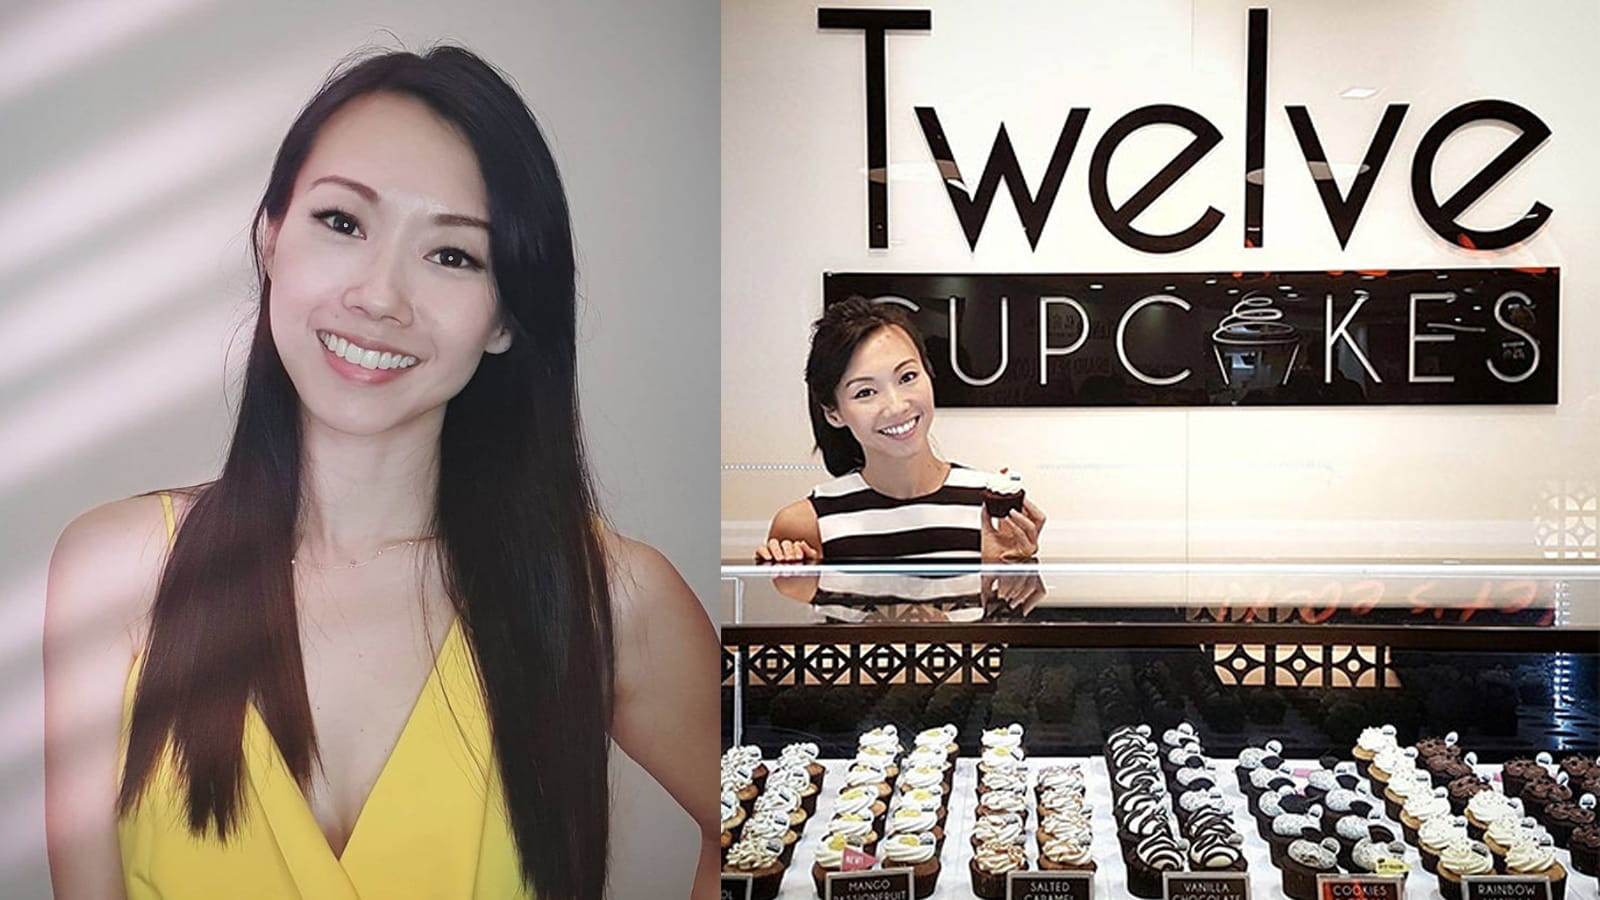 Twelve Cupcakes Co-Founder Jaime Teo Says She Only Learnt About Underpayment Of Foreign Workers When Investigations Began